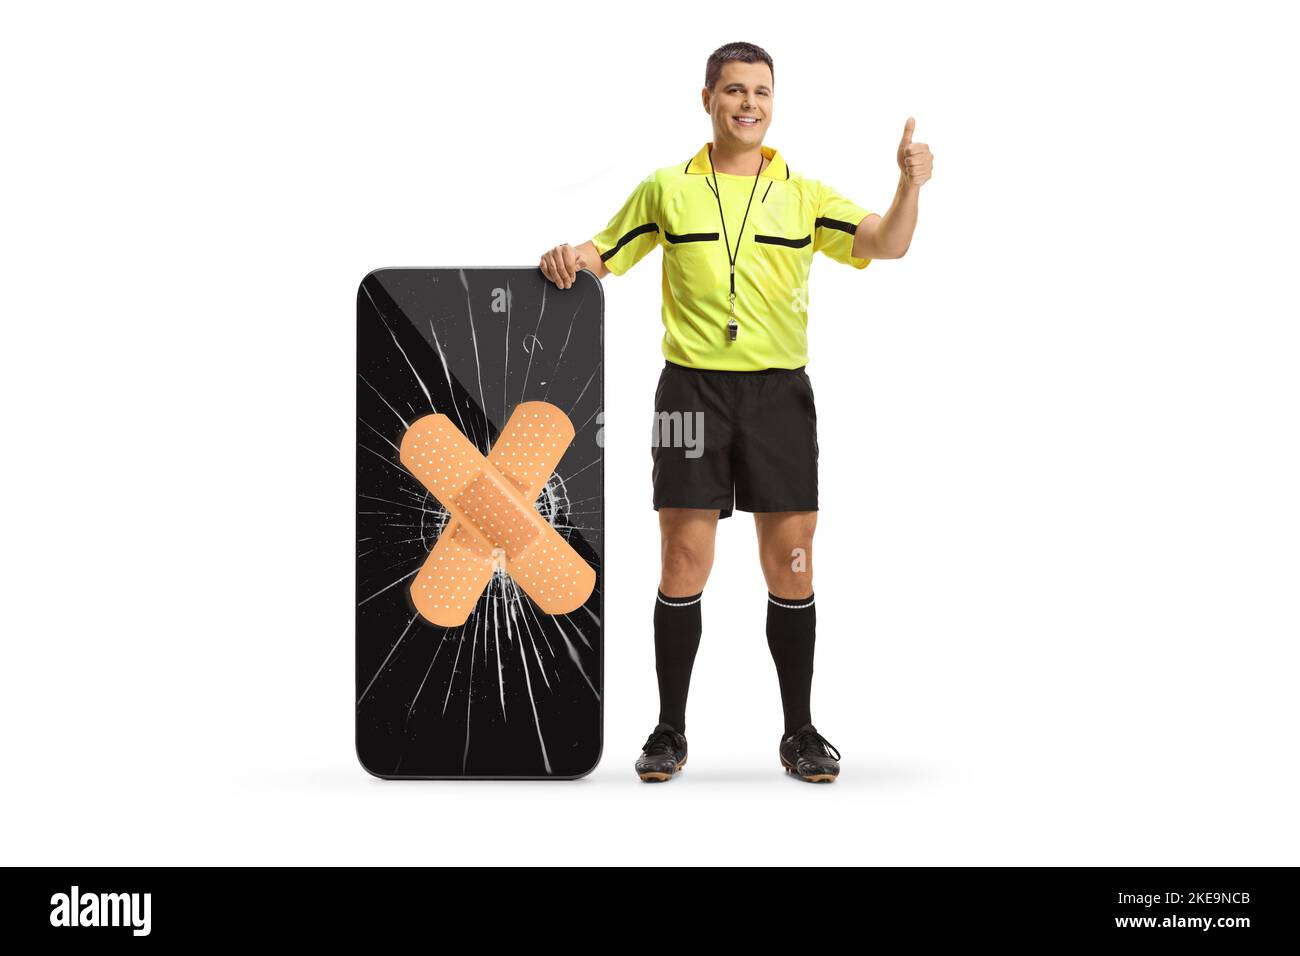 Full length portrait of a football referee next to a smartphone with broken screen fixed with bandage gesturing thumbs up isolated on white background Stock Photo